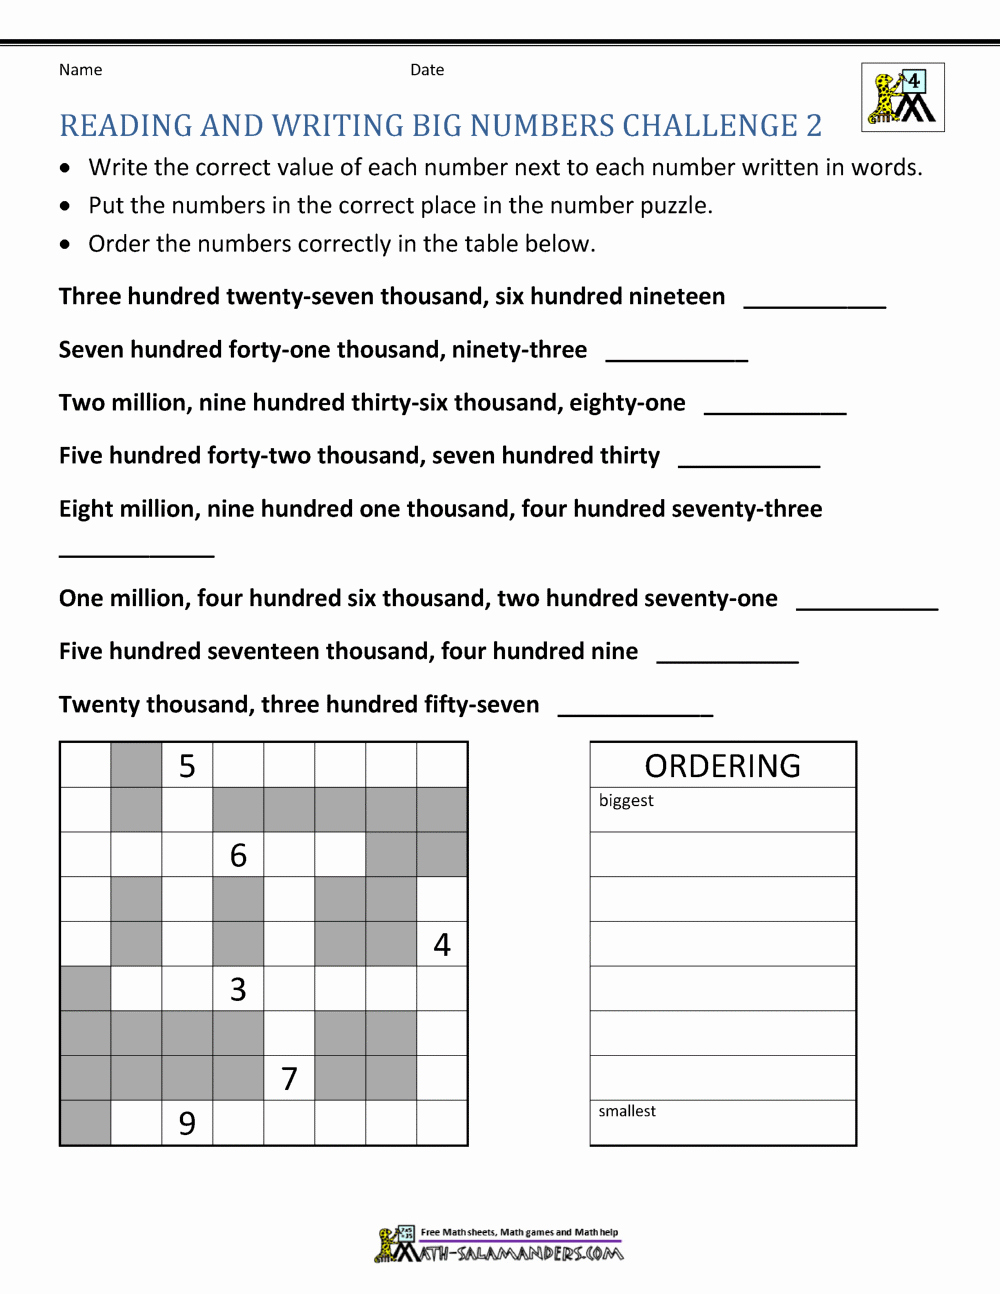 Word form Worksheets 4th Grade Lovely 4th Grade Math Worksheets Reading Writing and Rounding